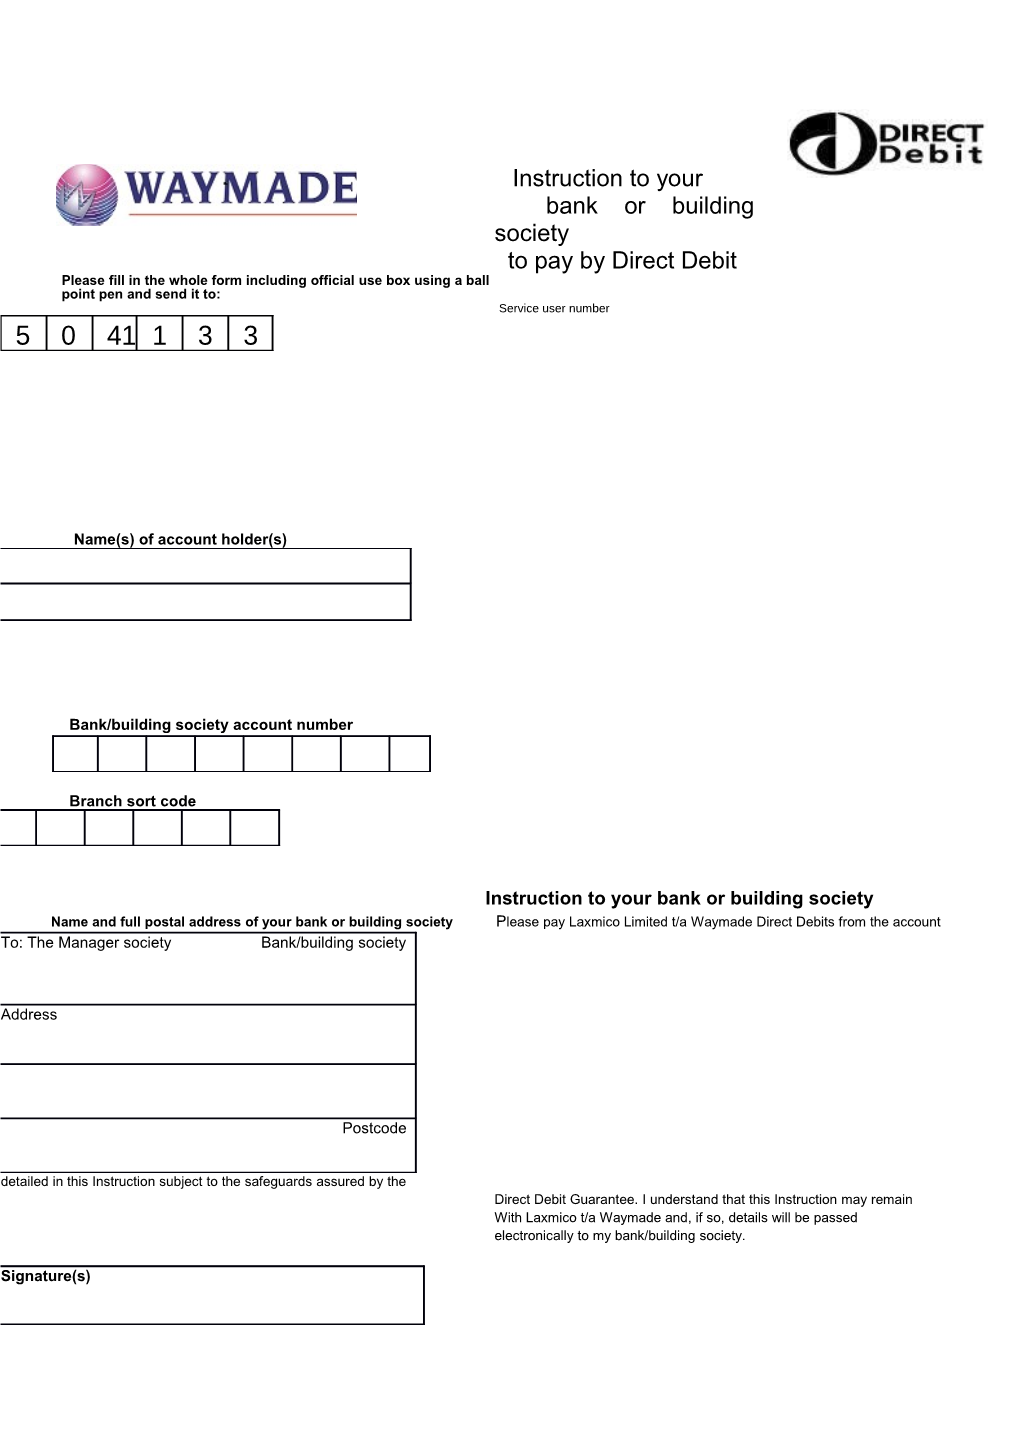 Please Fill in the Whole Form Including Official Use Box Using a Ball